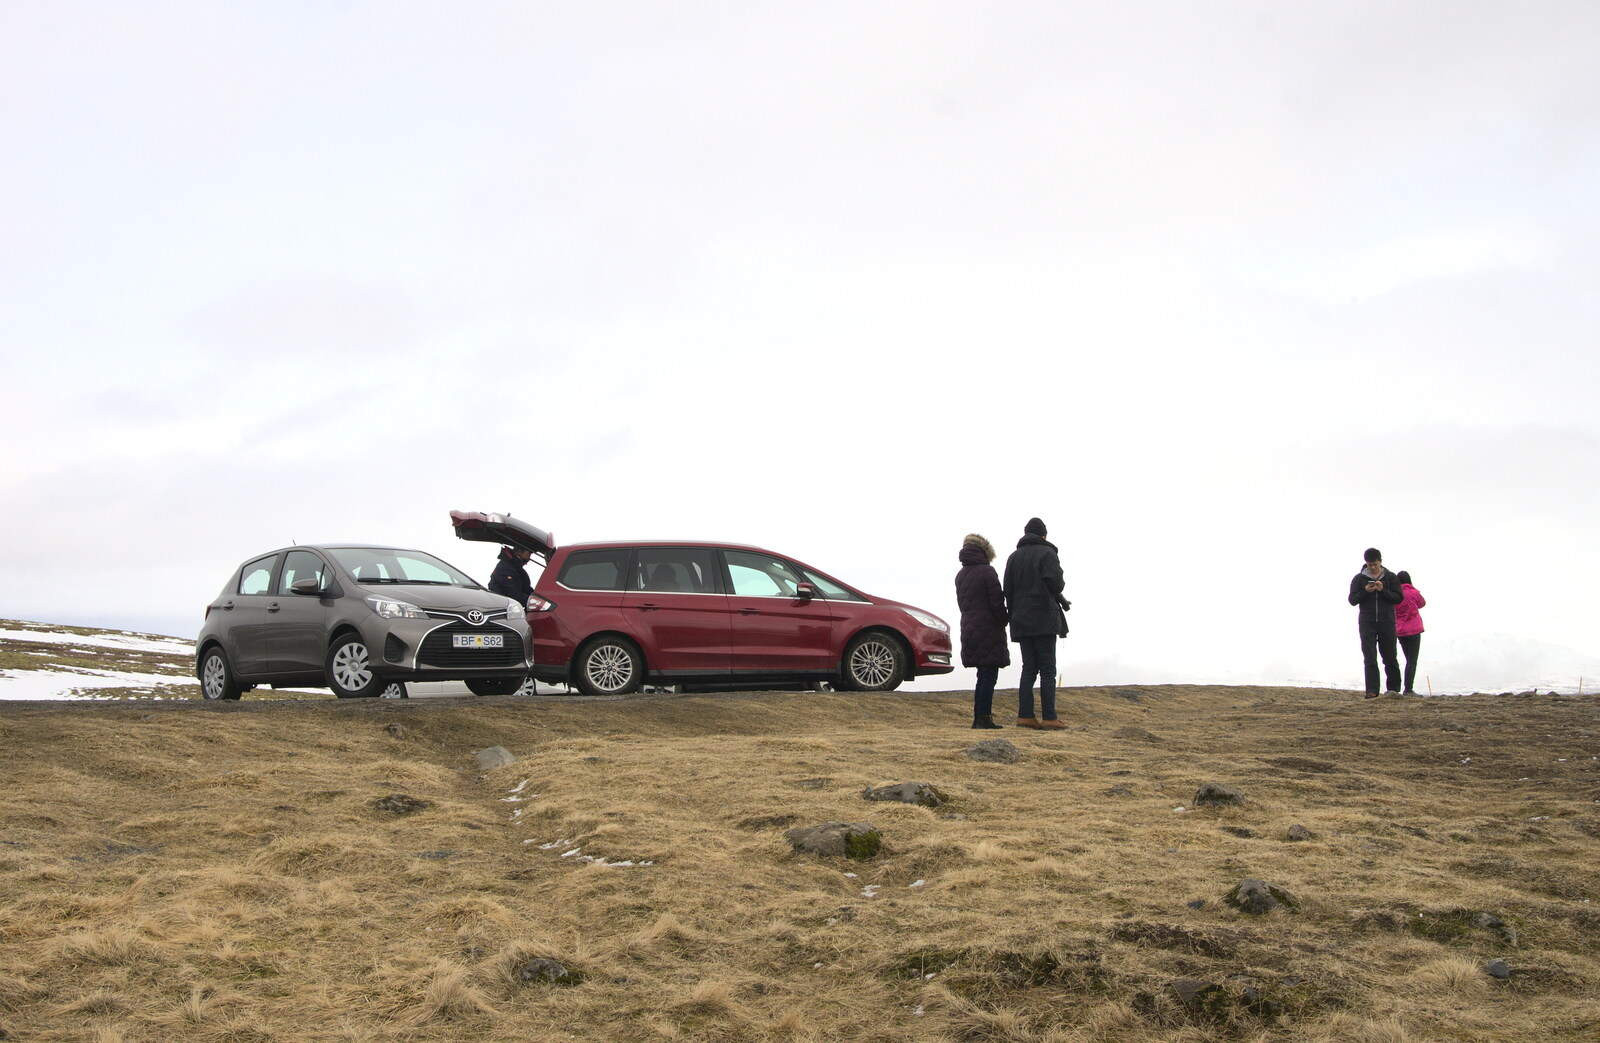 More tourists look out over the snow from The Golden Circle of Ísland, Iceland - 22nd April 2017